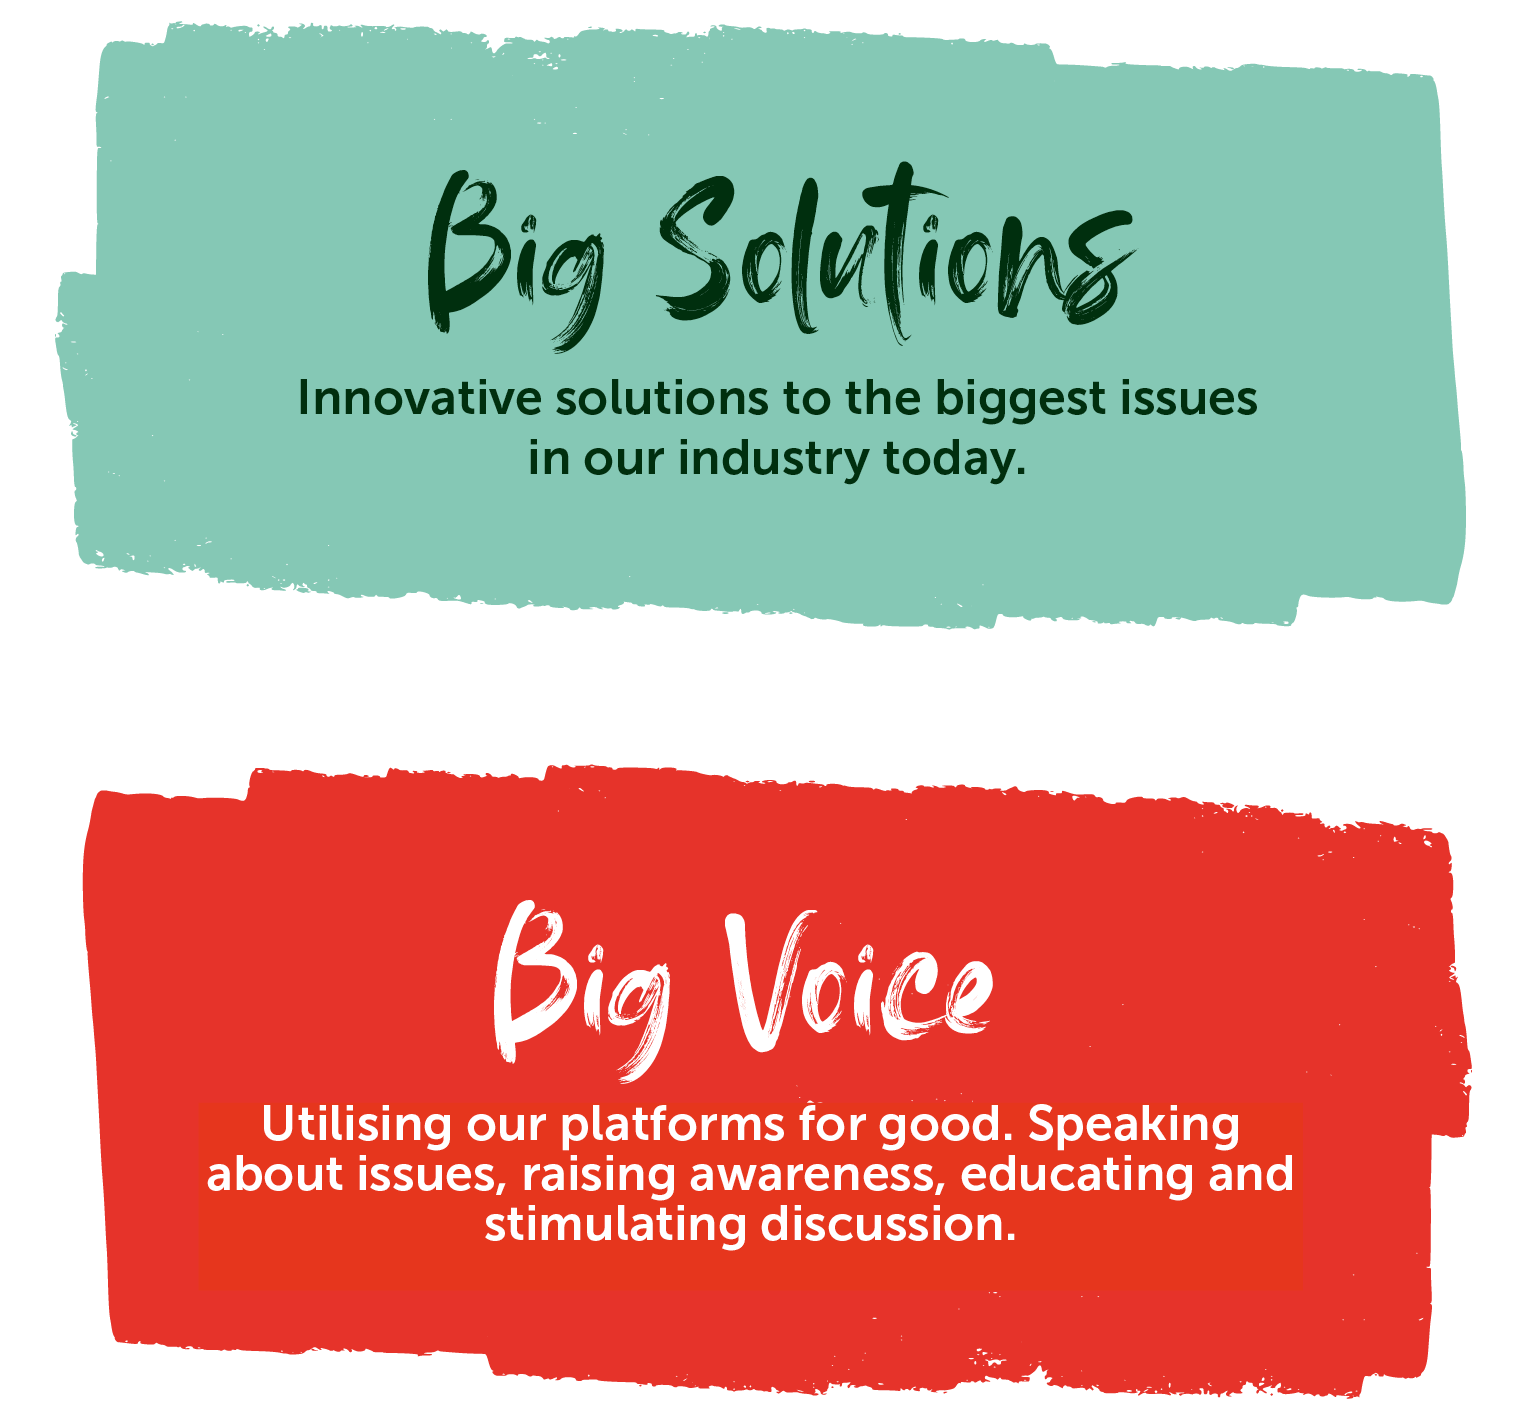 "Big Solutions - Innovative solutions to the biggest issues in our industry today" and "Big Voice - Utilising our platforms for good. Speaking about issues, raising awareness, educating and stimulating discussion."